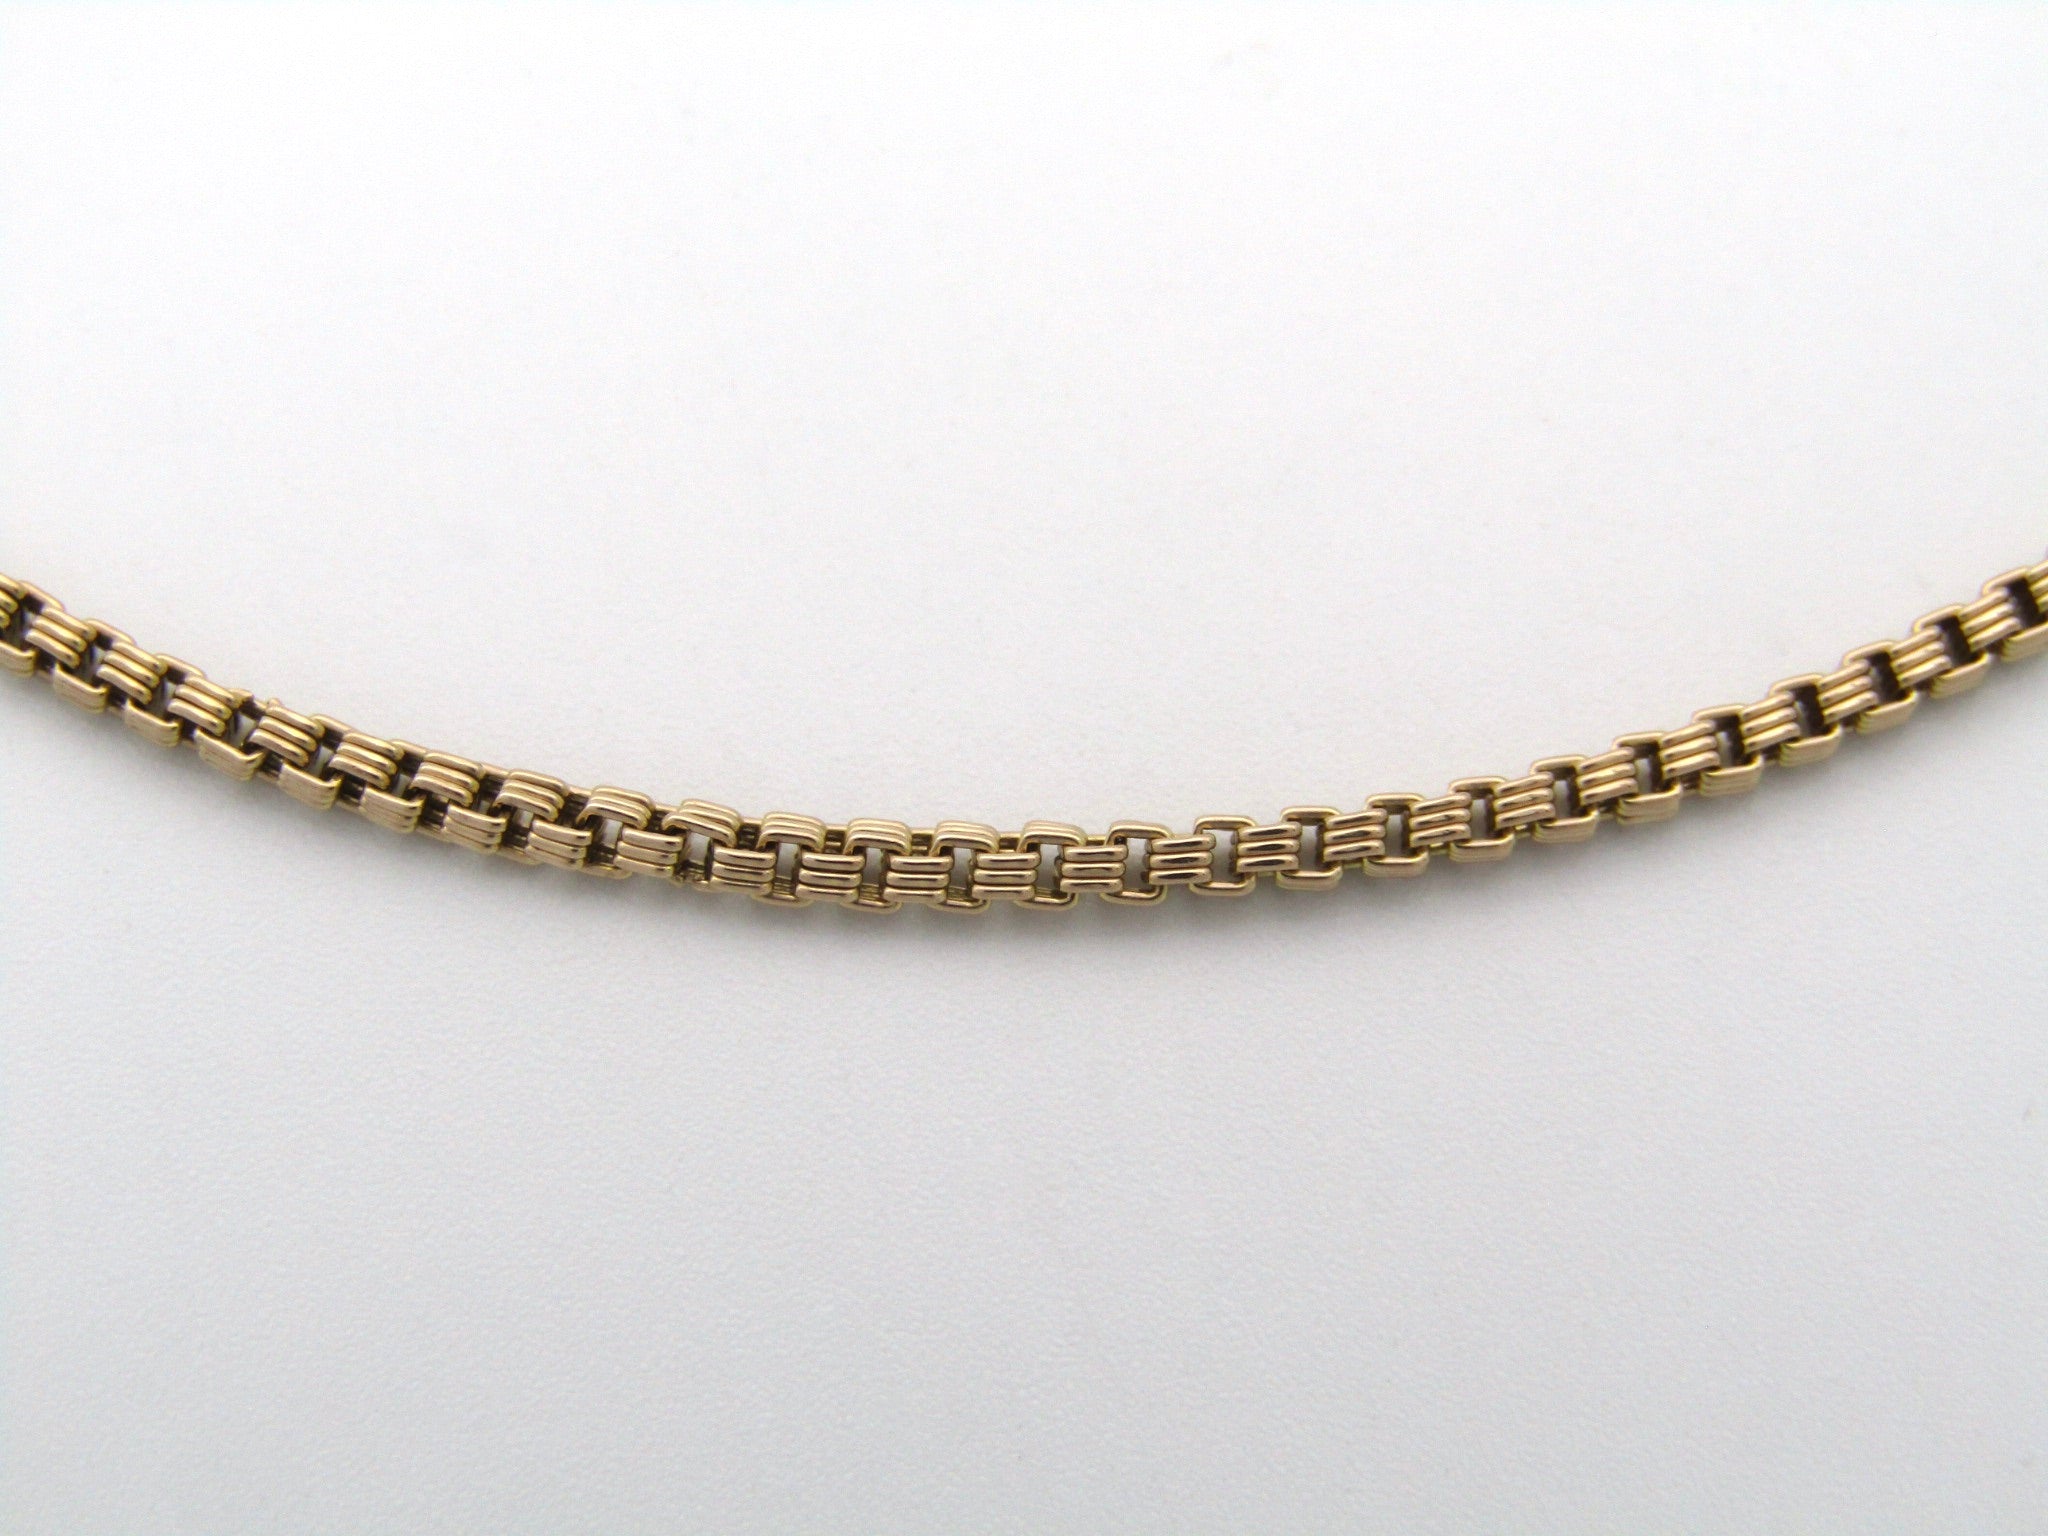 9K gold box chain necklace by Balestra.